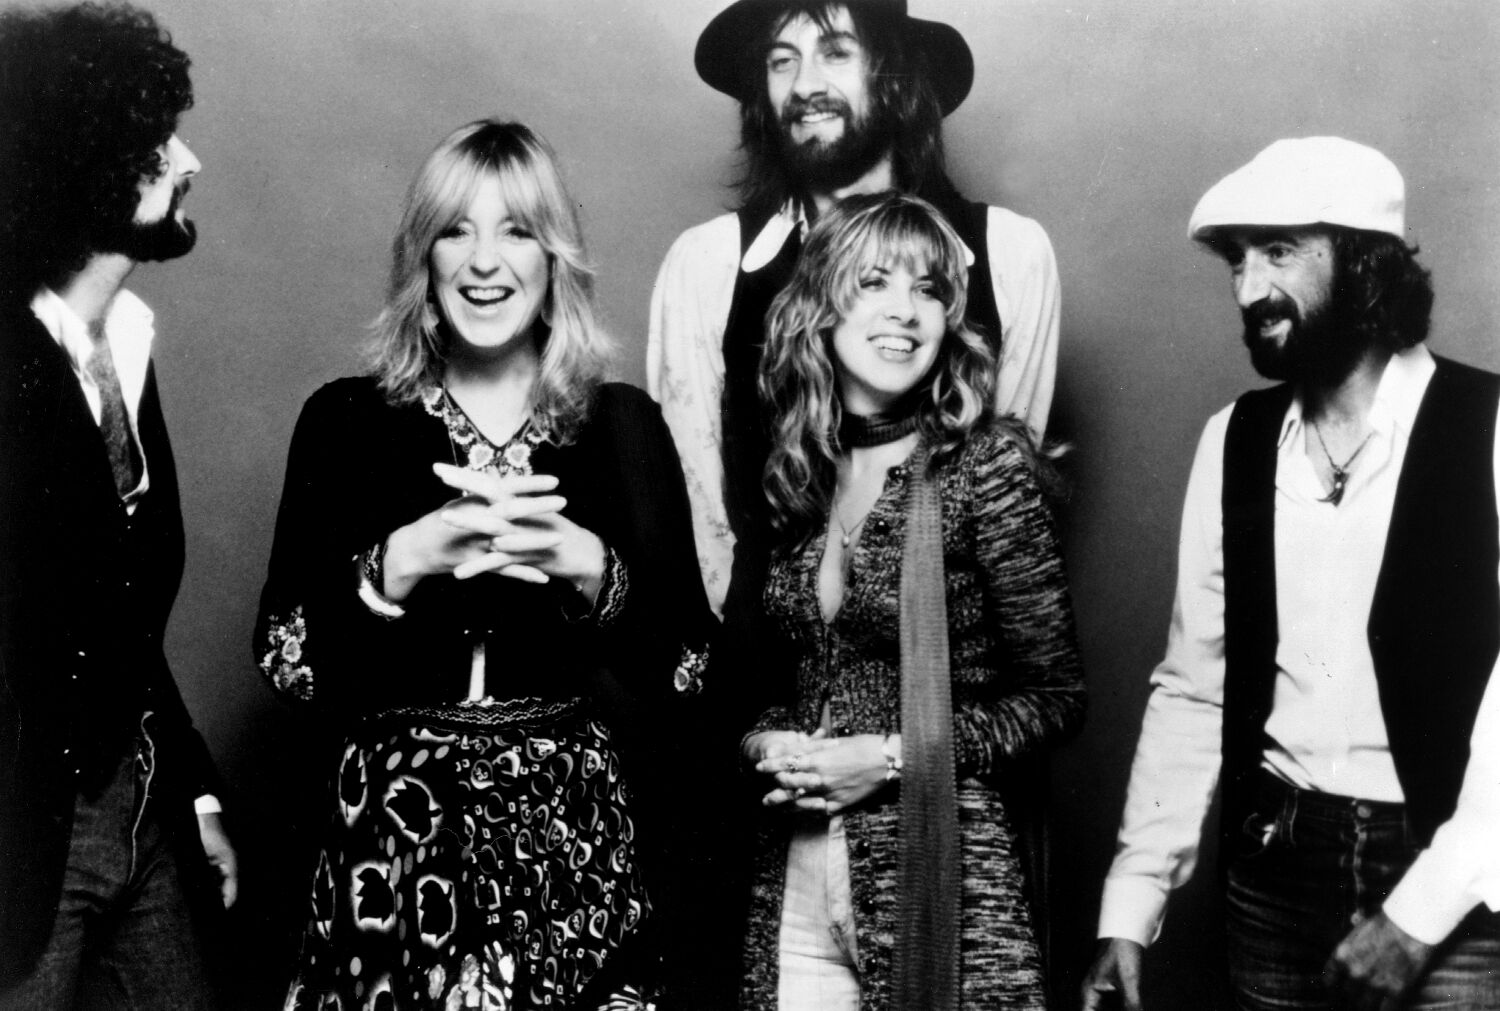 Christine McVie's greatness proved that shy girl power had a place in rock 'n' roll